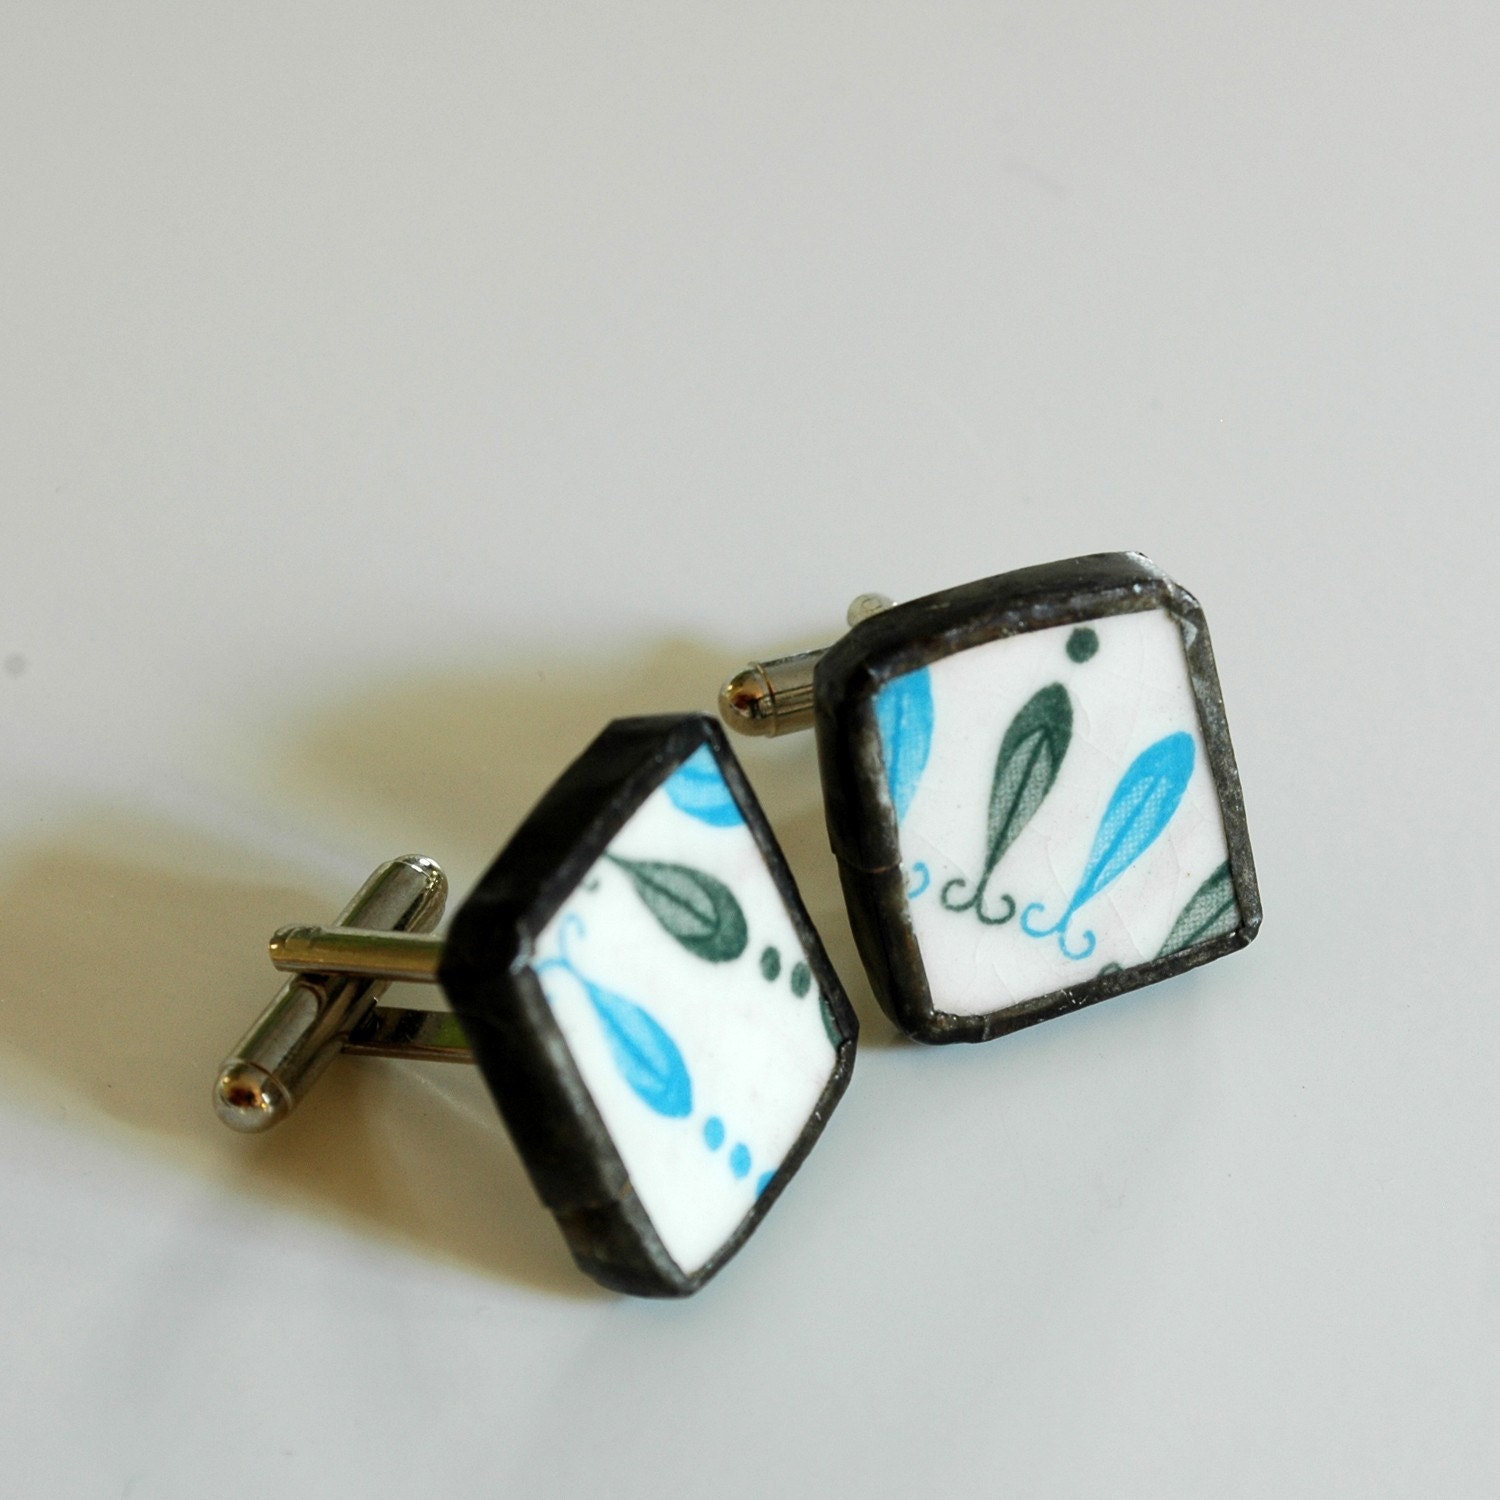 Broken Plate Cuff Links - Blue and Green Mod - Recycled China - TheBrokenPlate